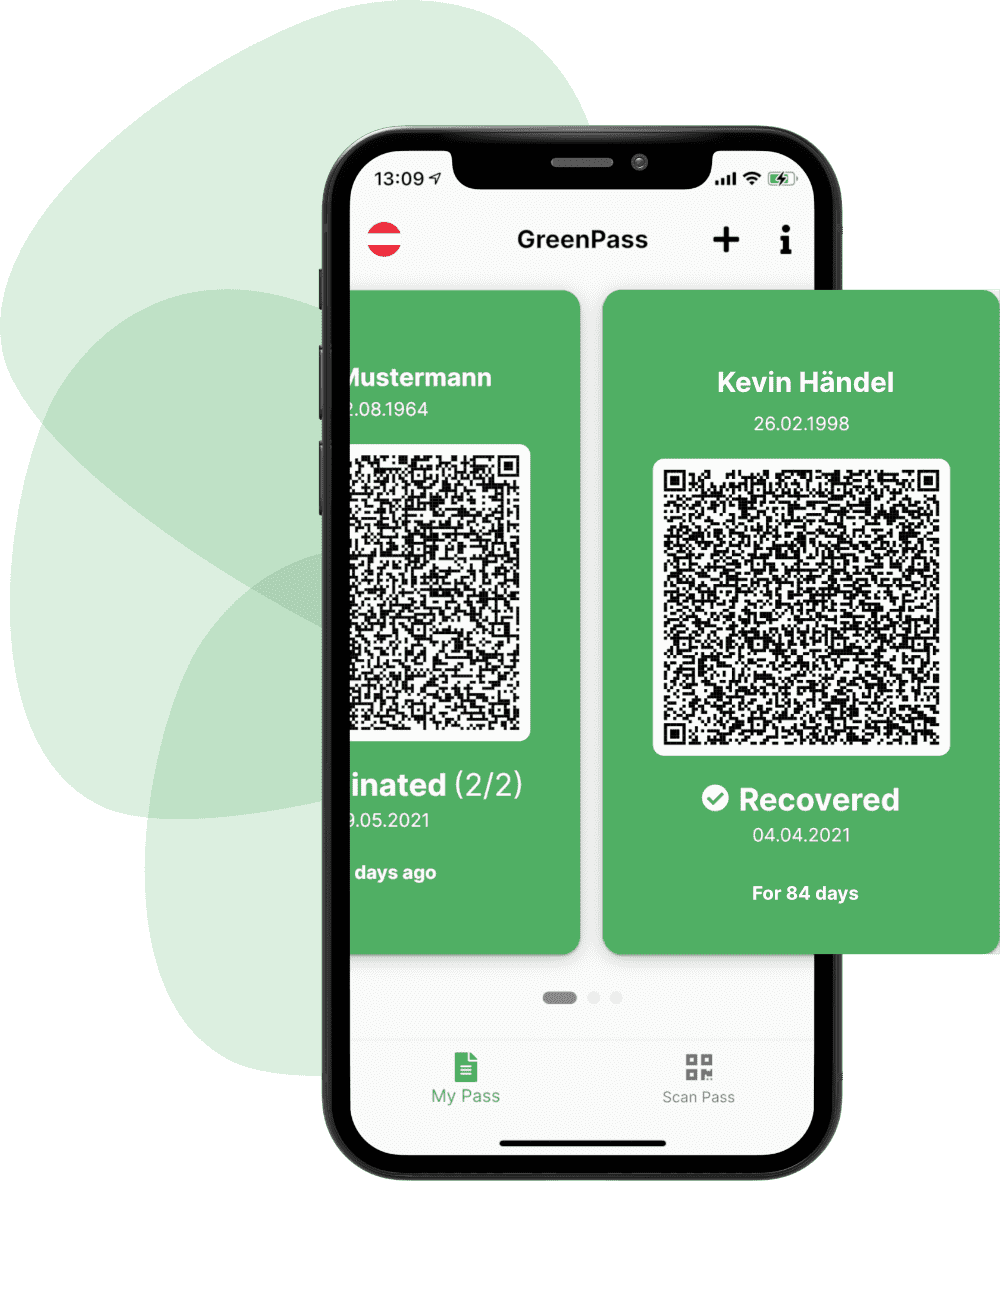 Lettore Scanner Green Pass Qrcode validazione EU green pass 4G WiFi Rj45 -  Webbo Connectivity Solutions